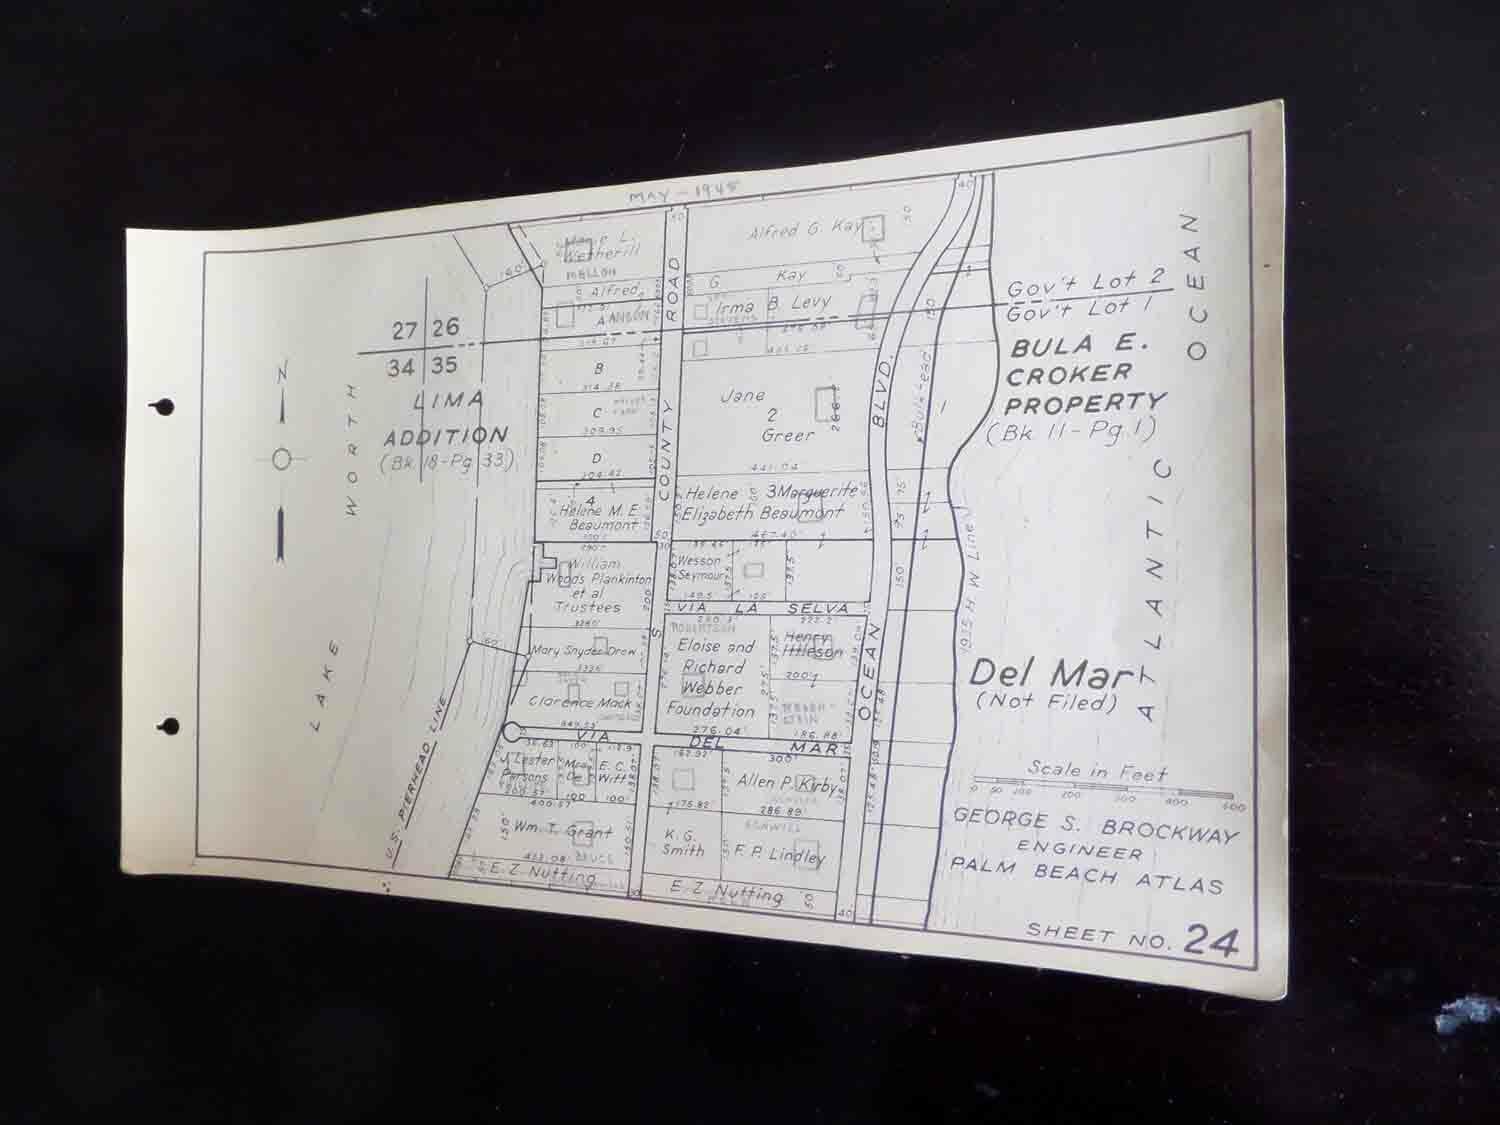 Palm Beach Atlas Sheets 24 and 24-A between Mar-a-Lago and Worth Avenue Без бренда